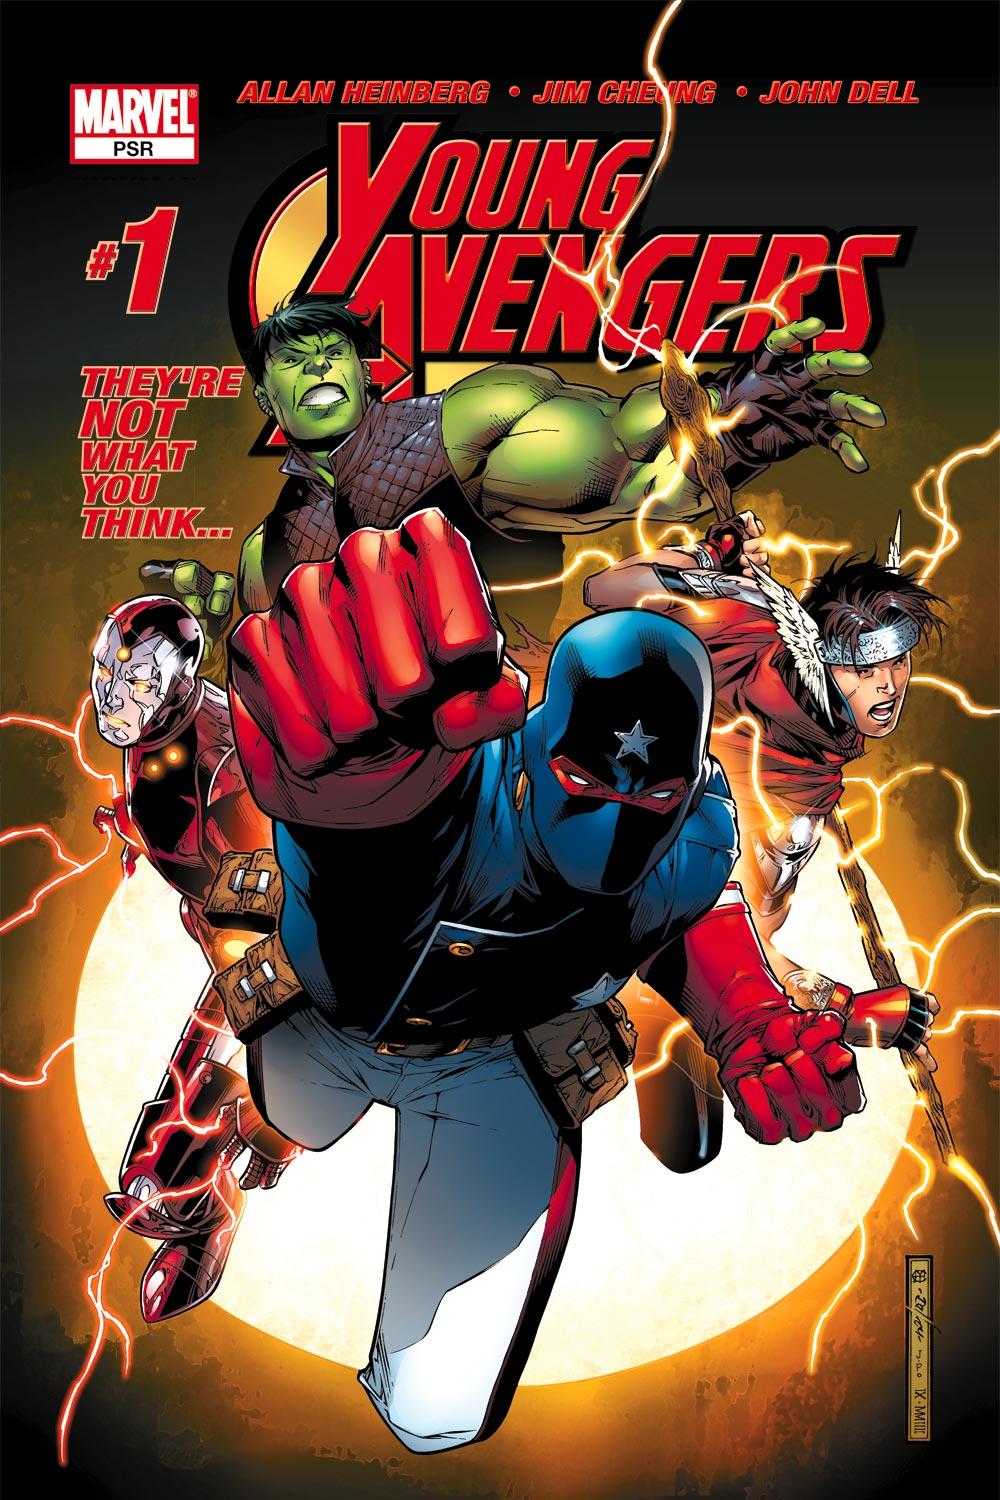 Cover image of Young Avengers #1 comic book issue. It shows the characters Patriot, Iron Lad, Wiccan, and Hulkling.